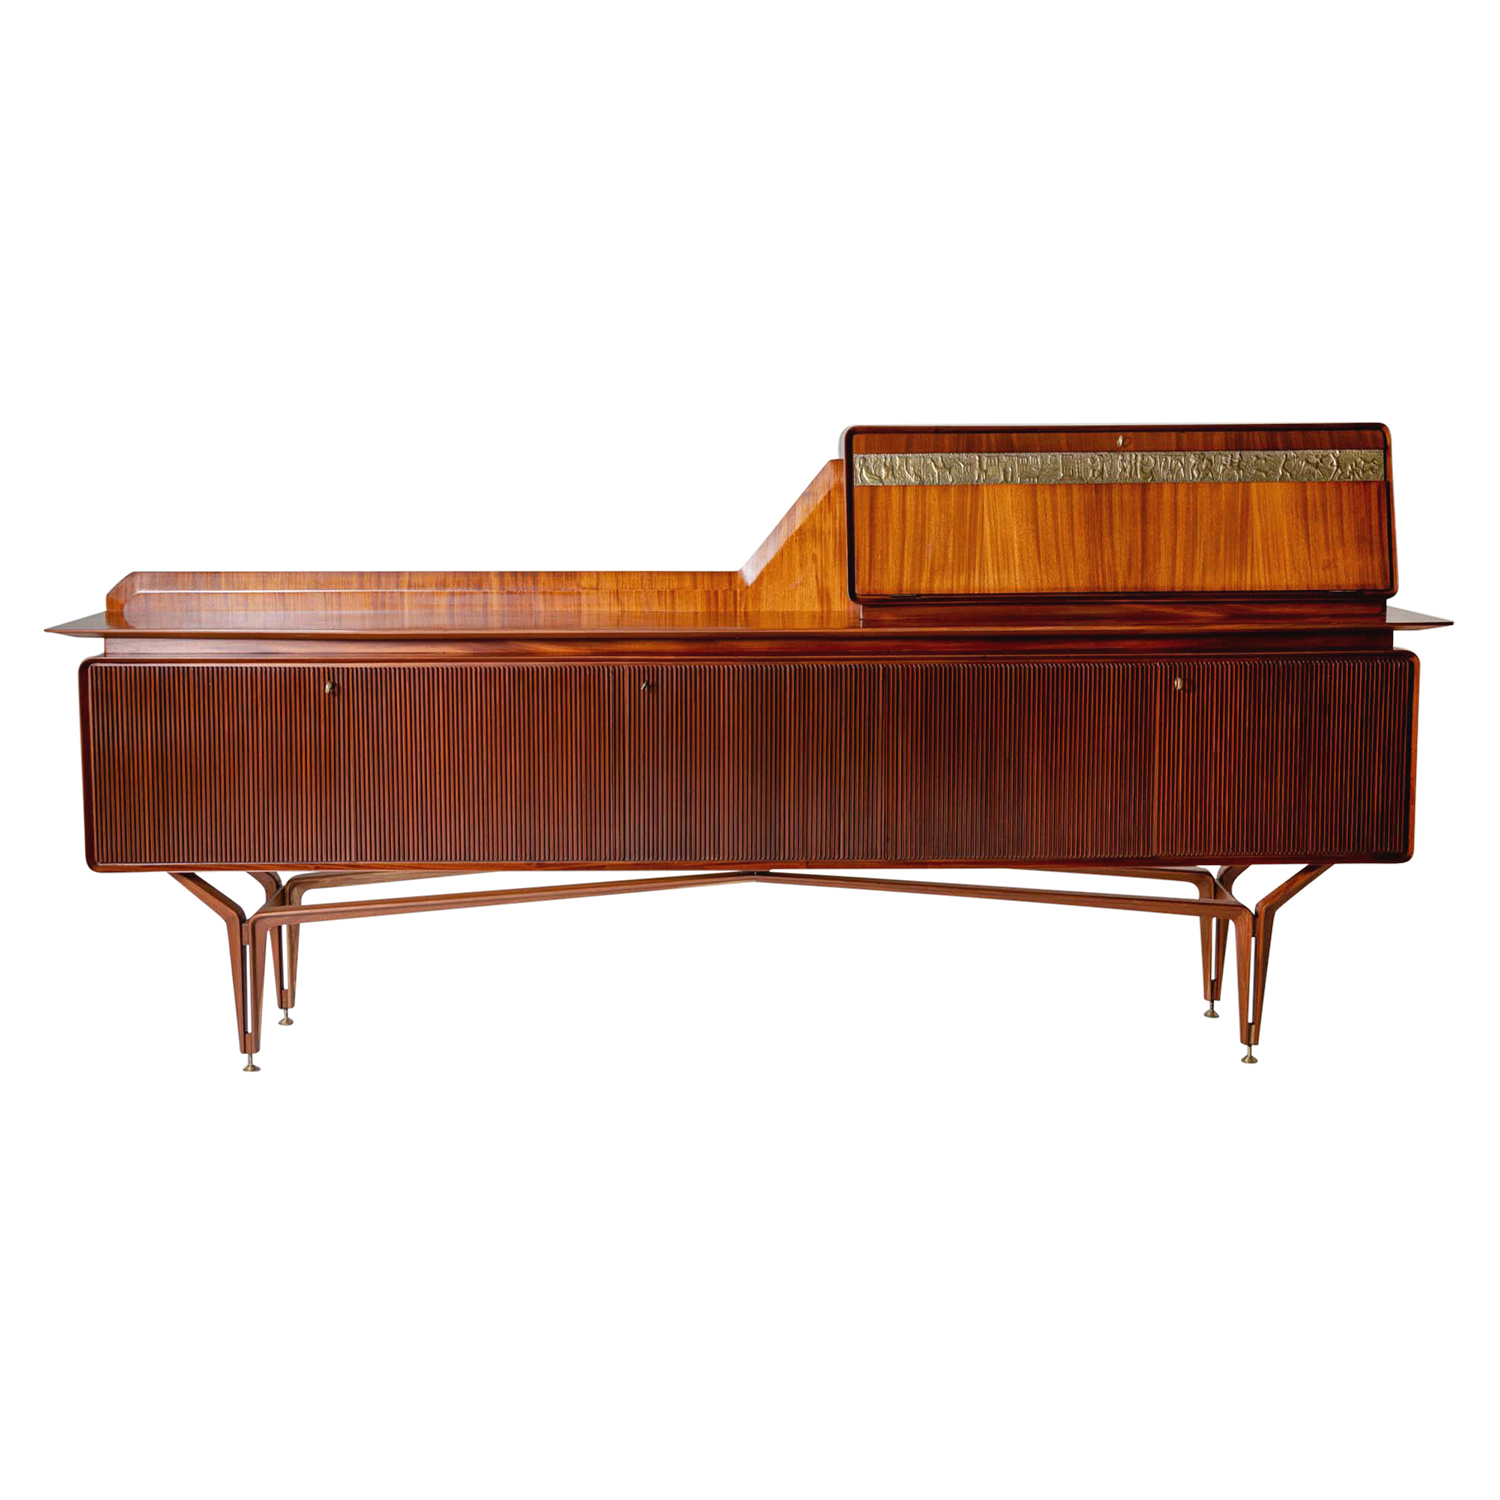 20th Century Italian Modern Rosewood Credenza – Vintage Dry Bar by Mobili Cantù